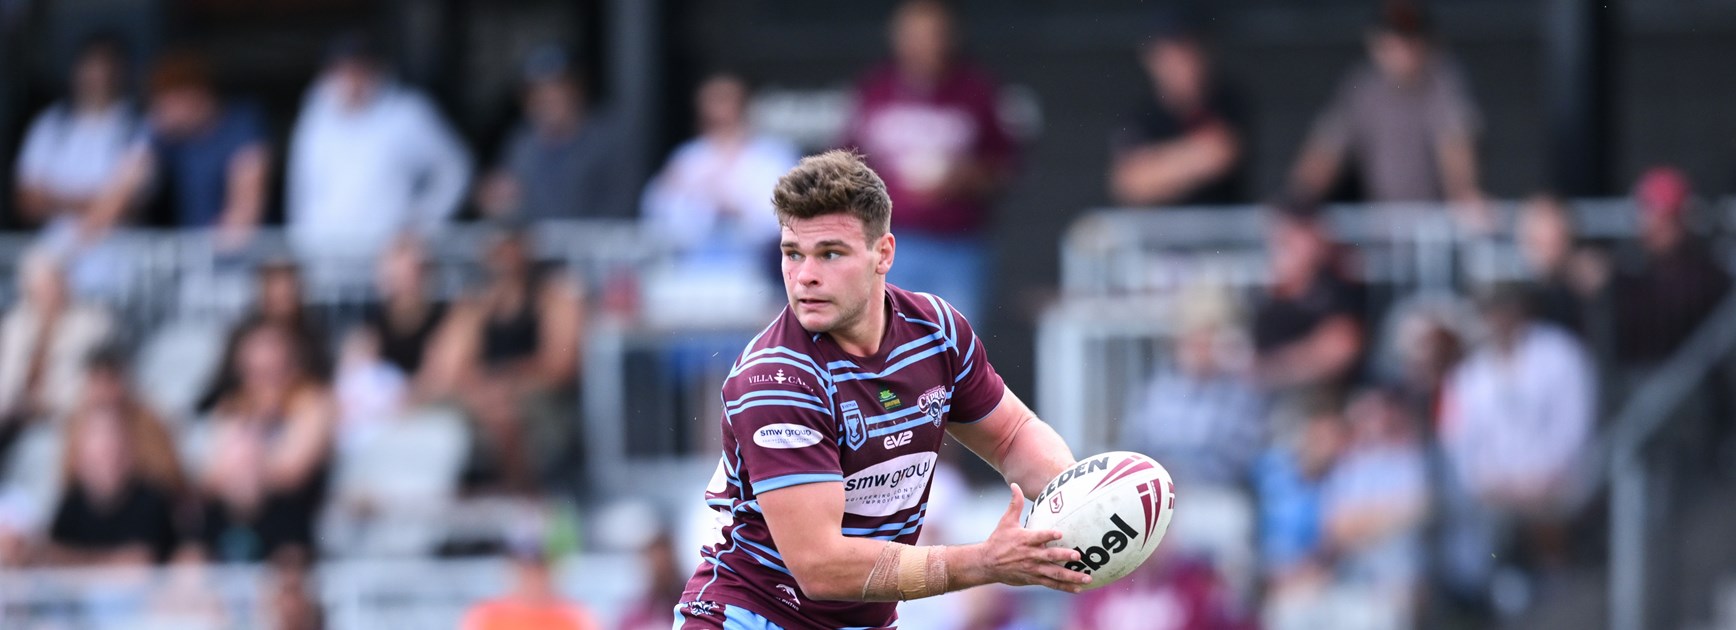 Cup to NRL graduate: Lachlan Hubner